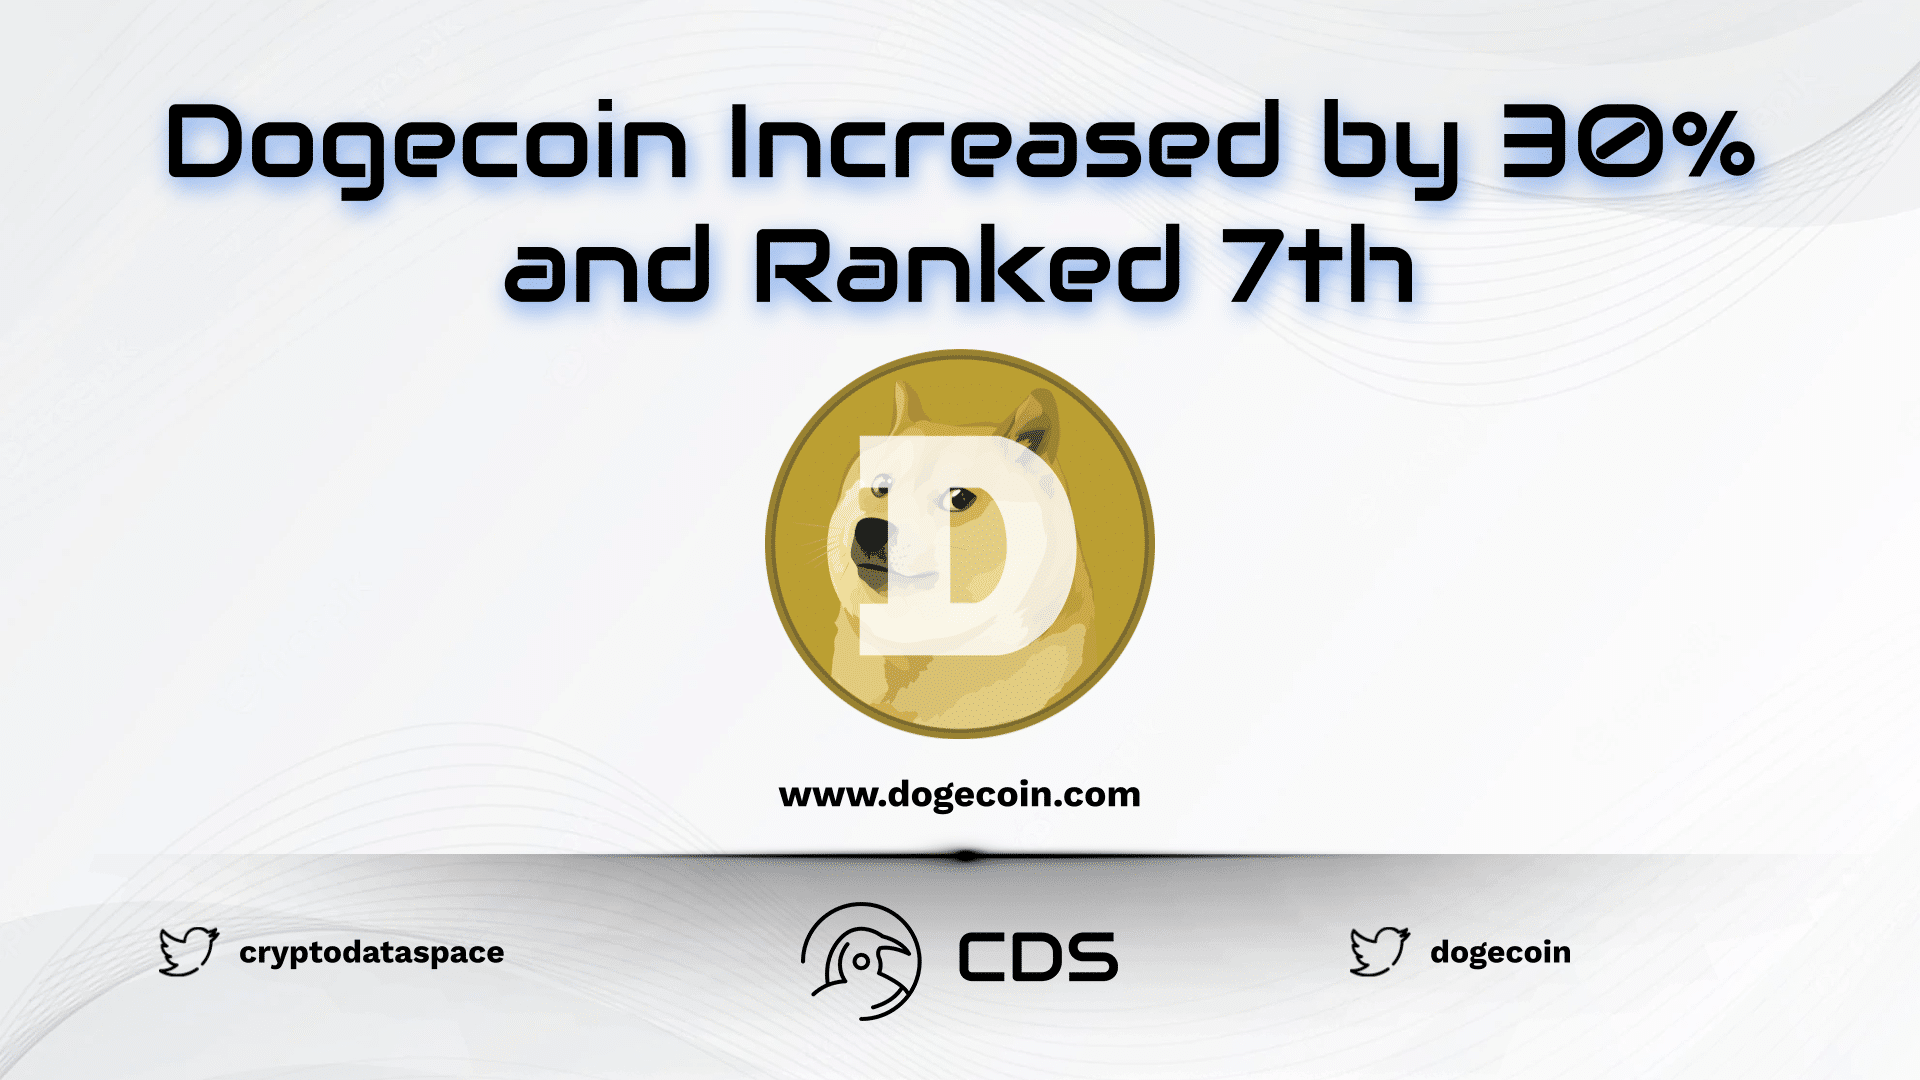 Dogecoin Increased by 30% and Ranked 7th